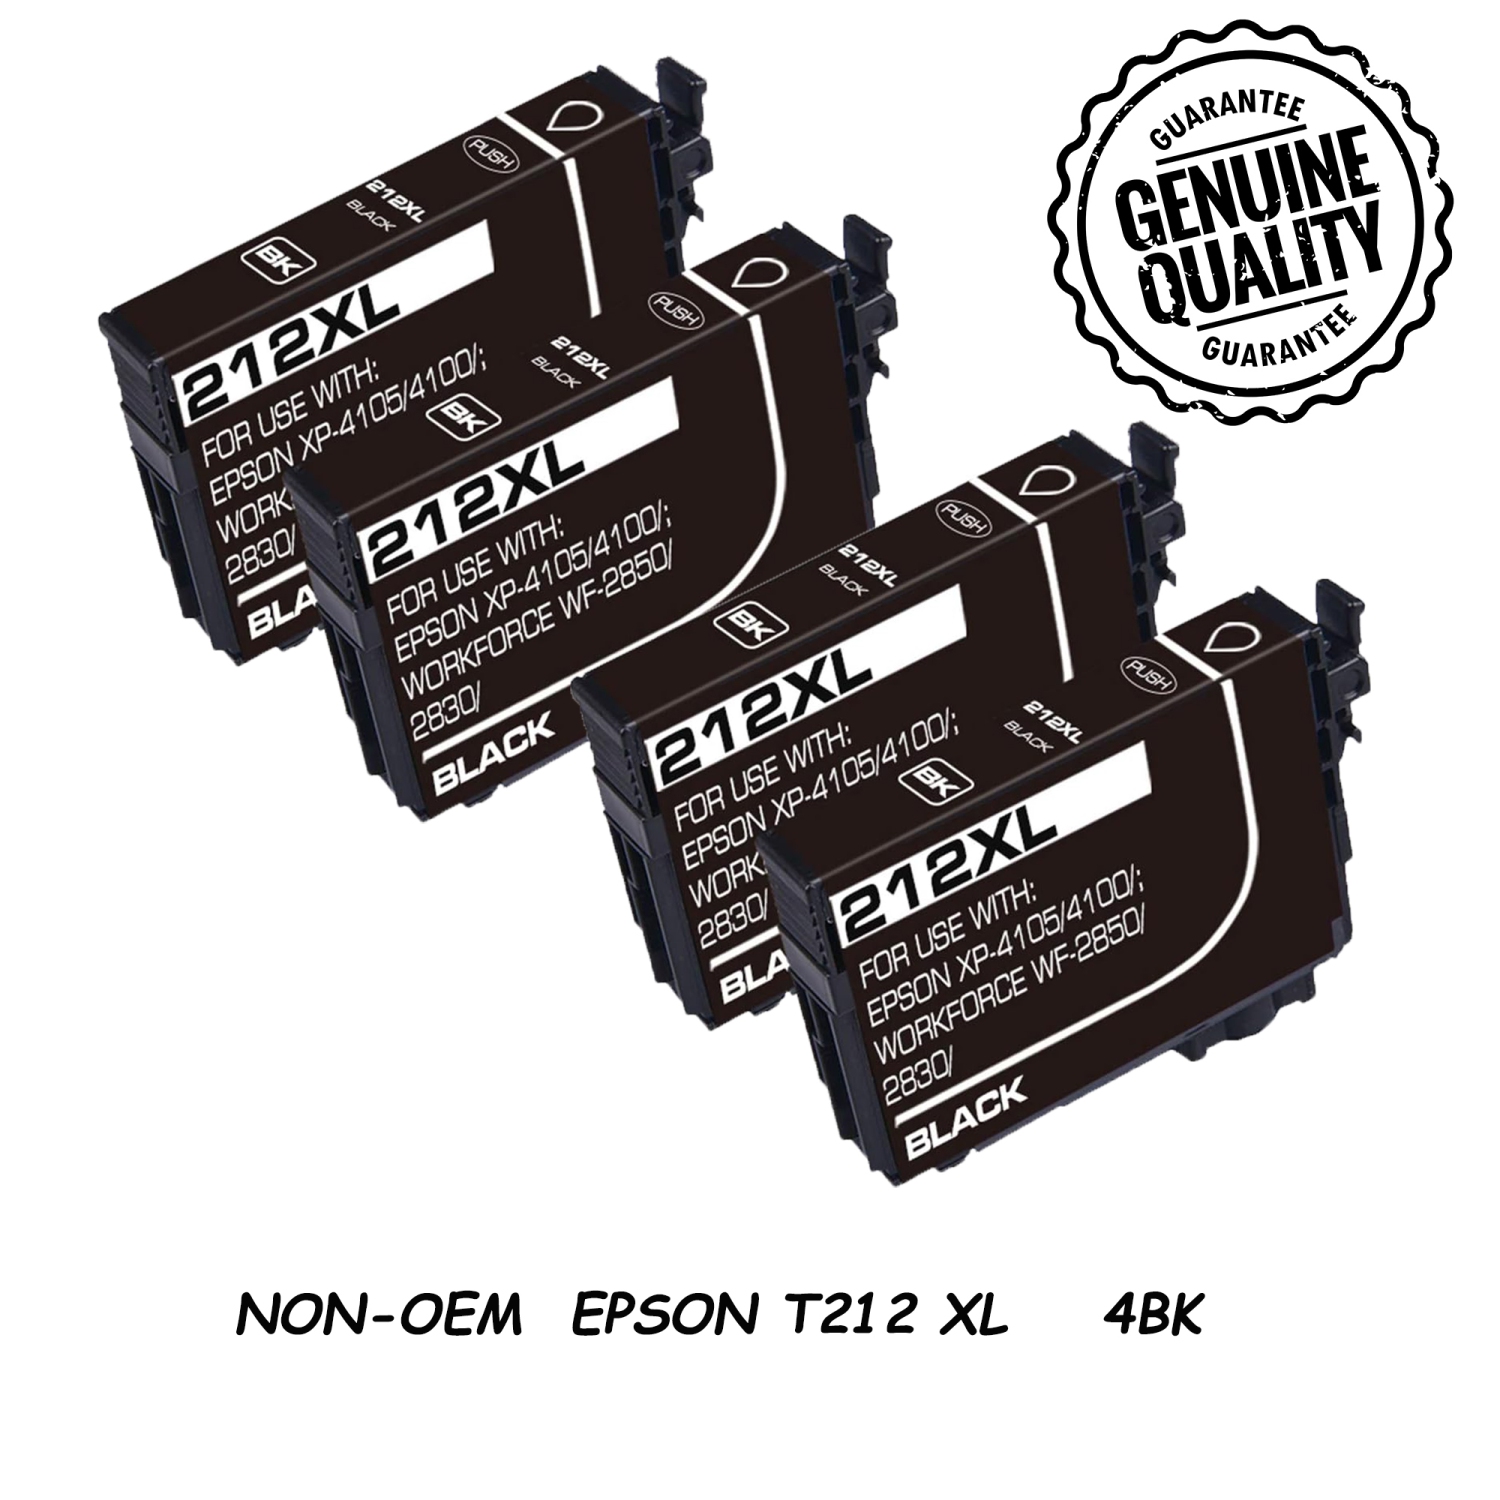 [New Chip] 4 Black Compatible Ink Cartridge Replacement for Epson T212 212 XL to use with Expression Home XP-4100 , EpsonWorkForce WF-2830 , WorkForce WF-2850